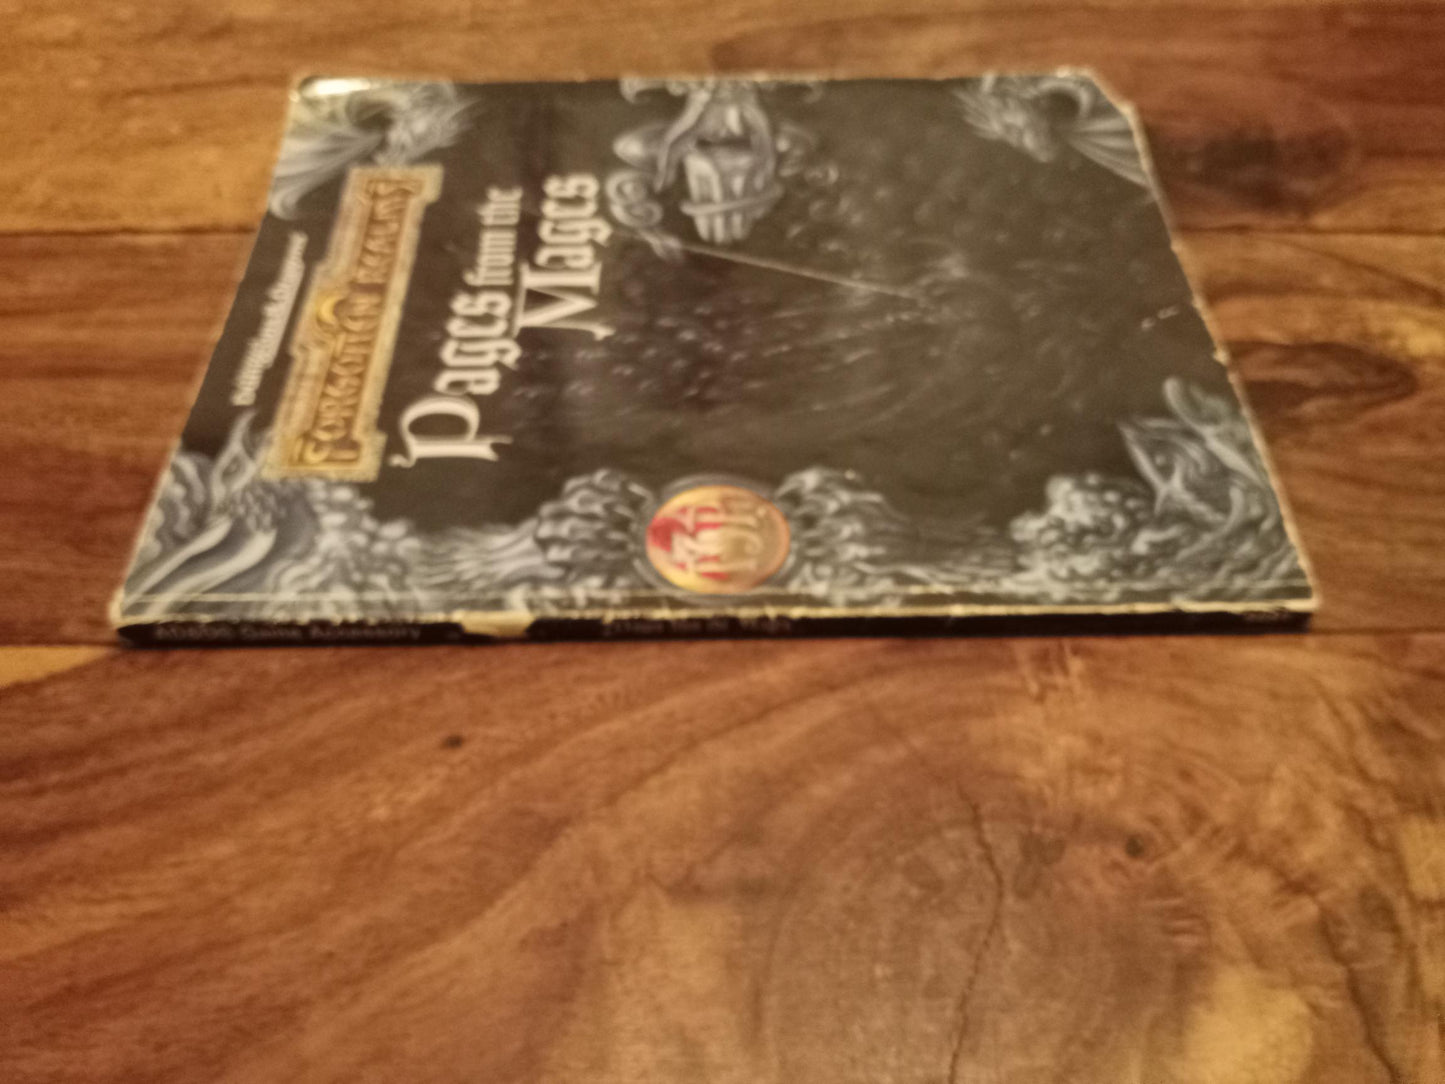 Forgotten Realms Pages from the Mages TSR 9491 AD&D 1995